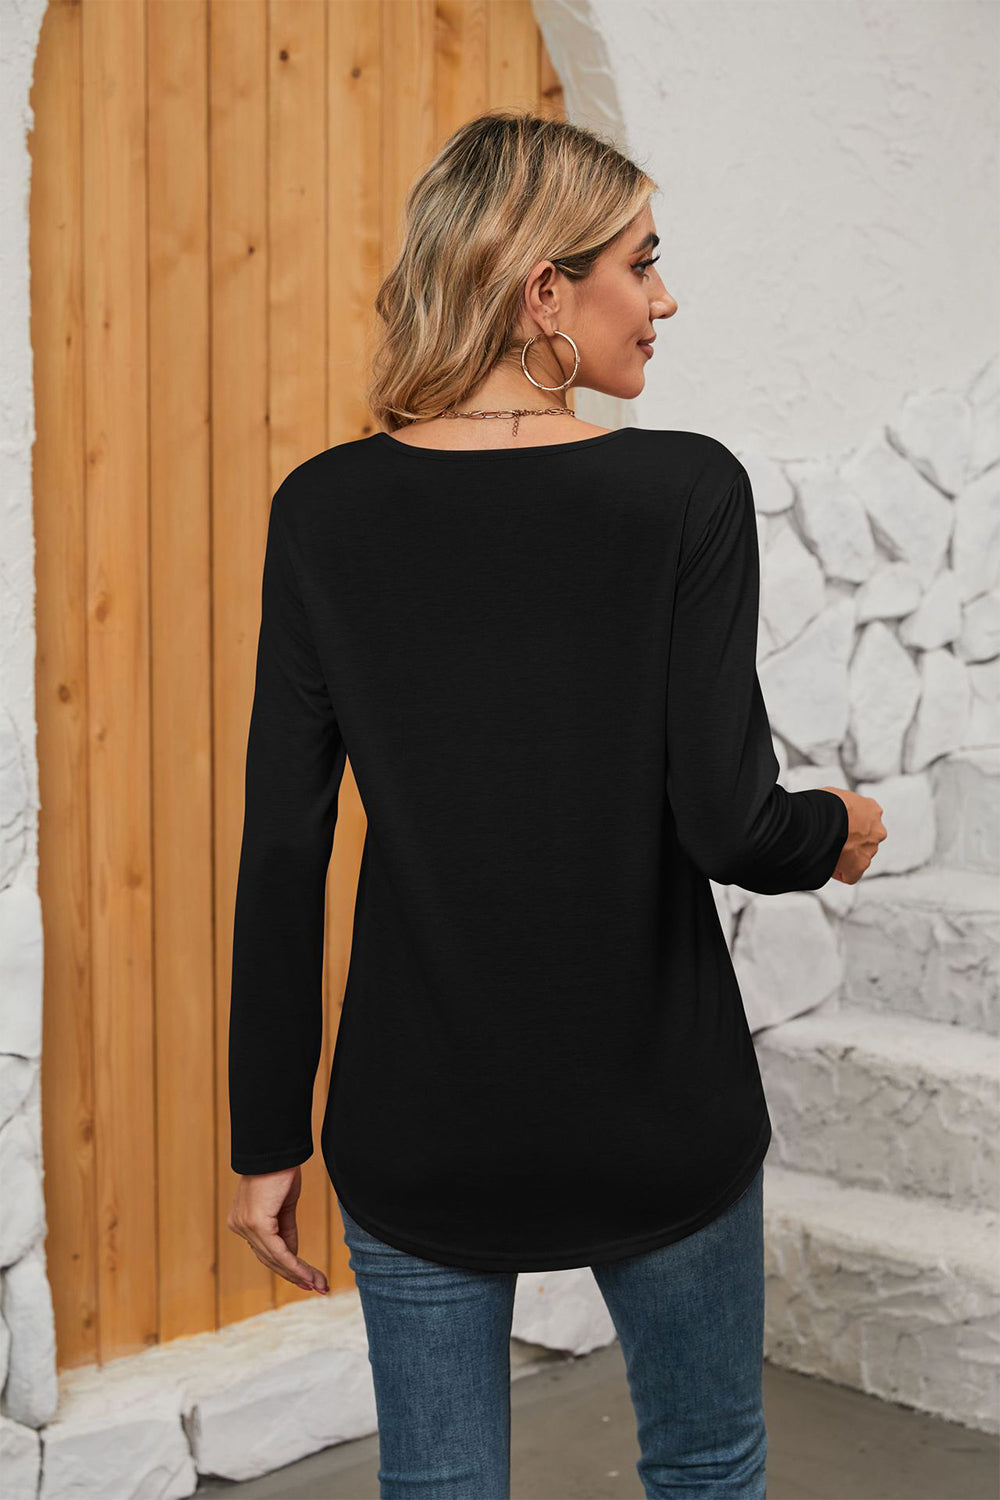 Sky Blush Square Neck Long Sleeve Viscose Blouse | Hypoallergenic - Allergy Friendly - Naturally Free